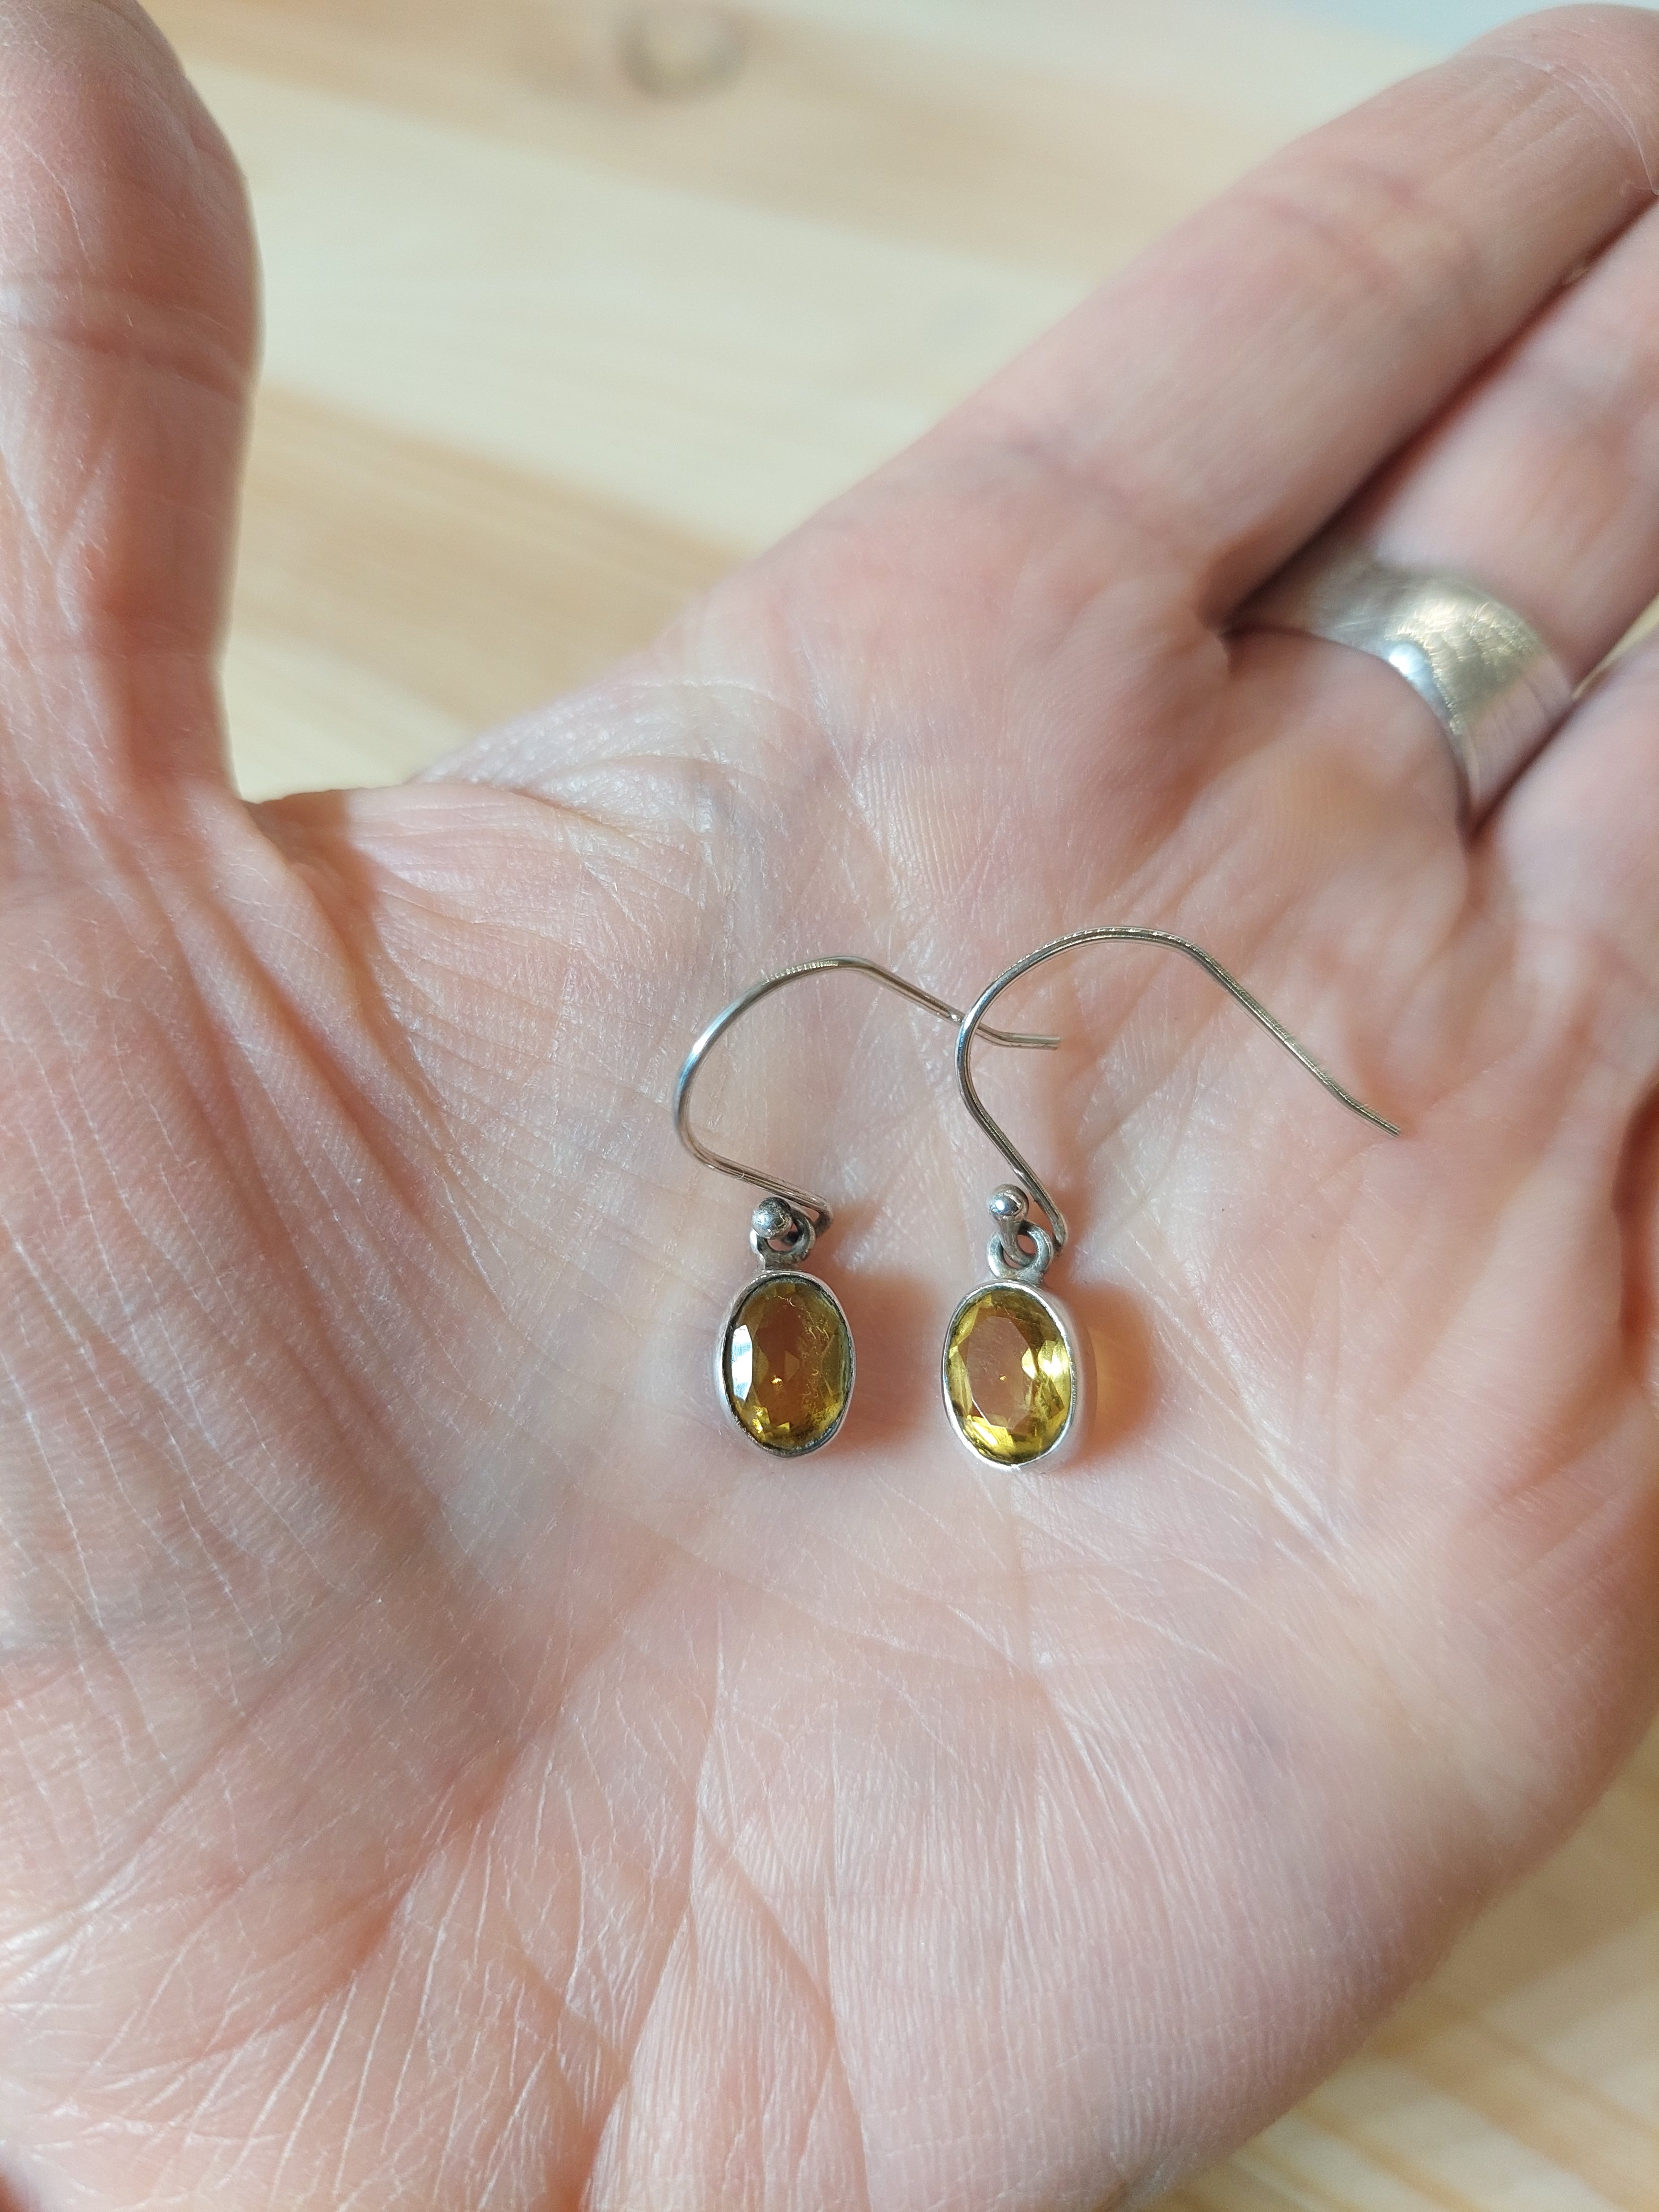 Citrine Oval Faceted Drop Earrings